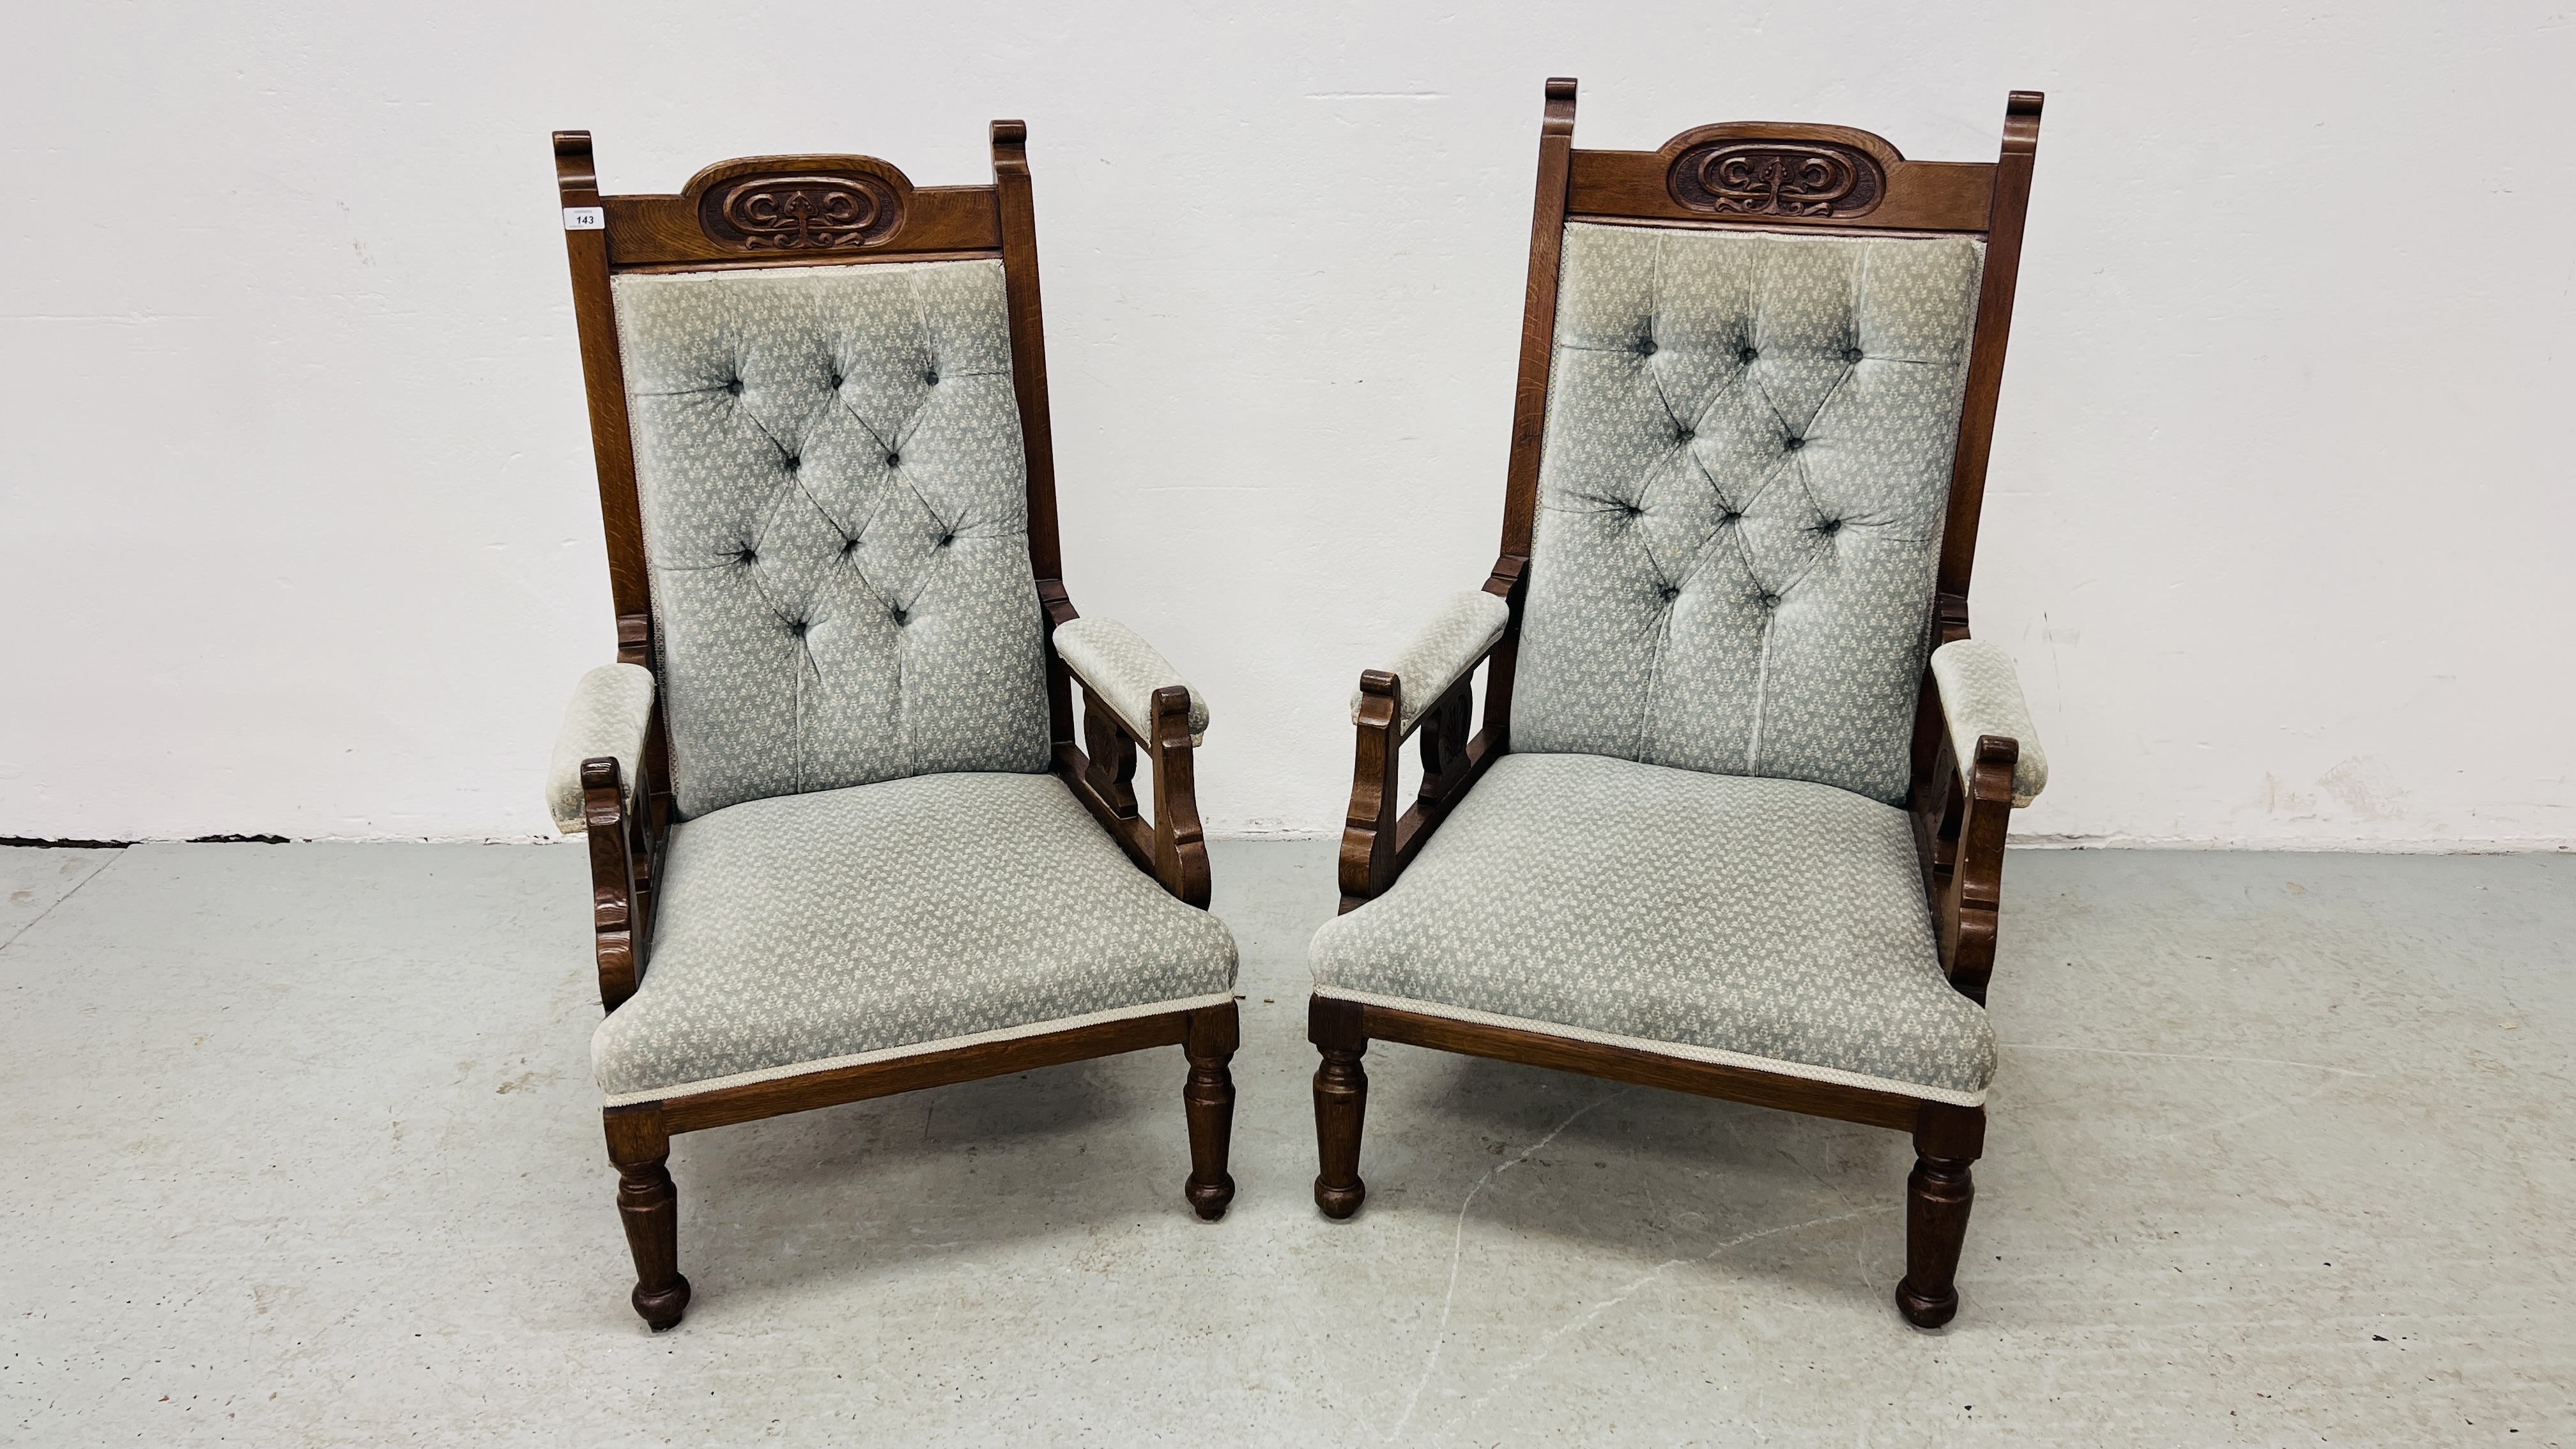 A PAIR OF EDWARDIAN OAK LOW SEAT CHAIRS UPHOLSTERED IN PASTEL BLUE